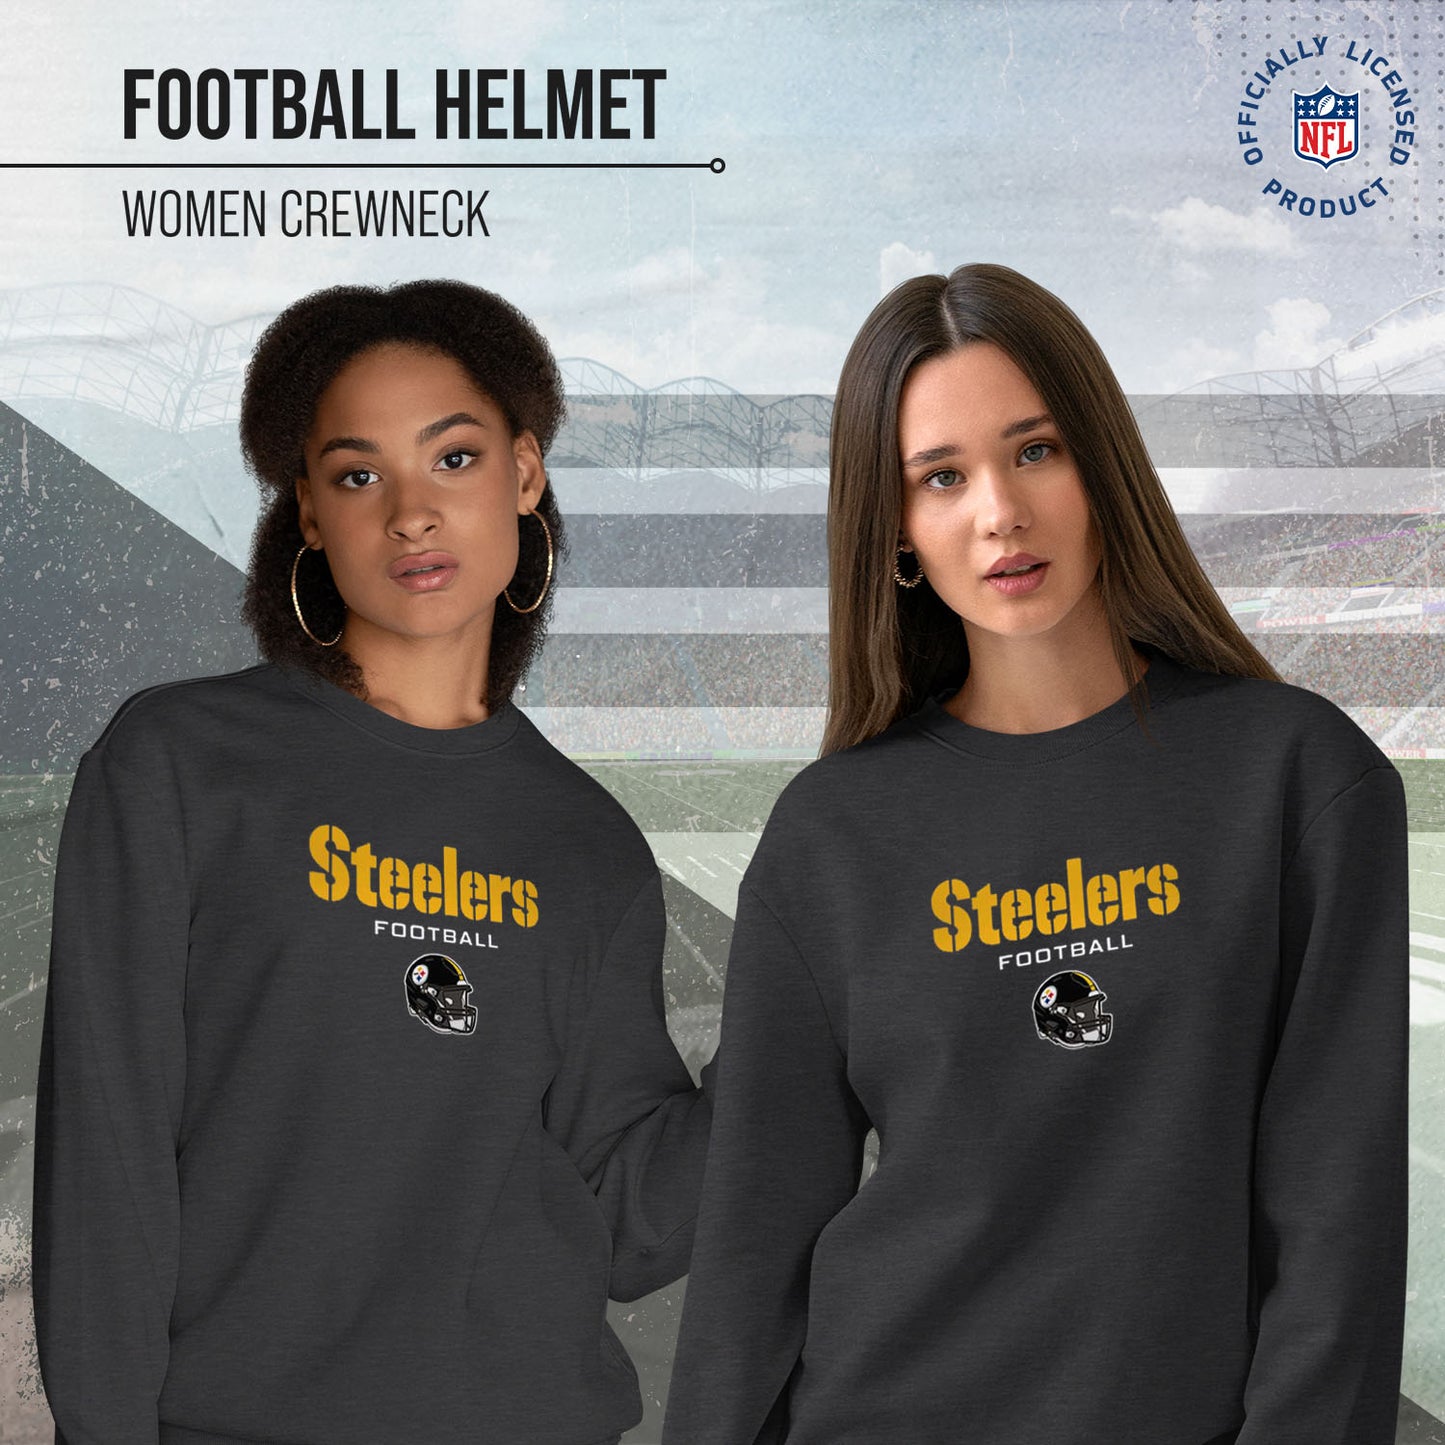 Pittsburgh Steelers Women's NFL Football Helmet Charcoal Slouchy Crewneck -Tagless Lightweight Pullover - Charcoal